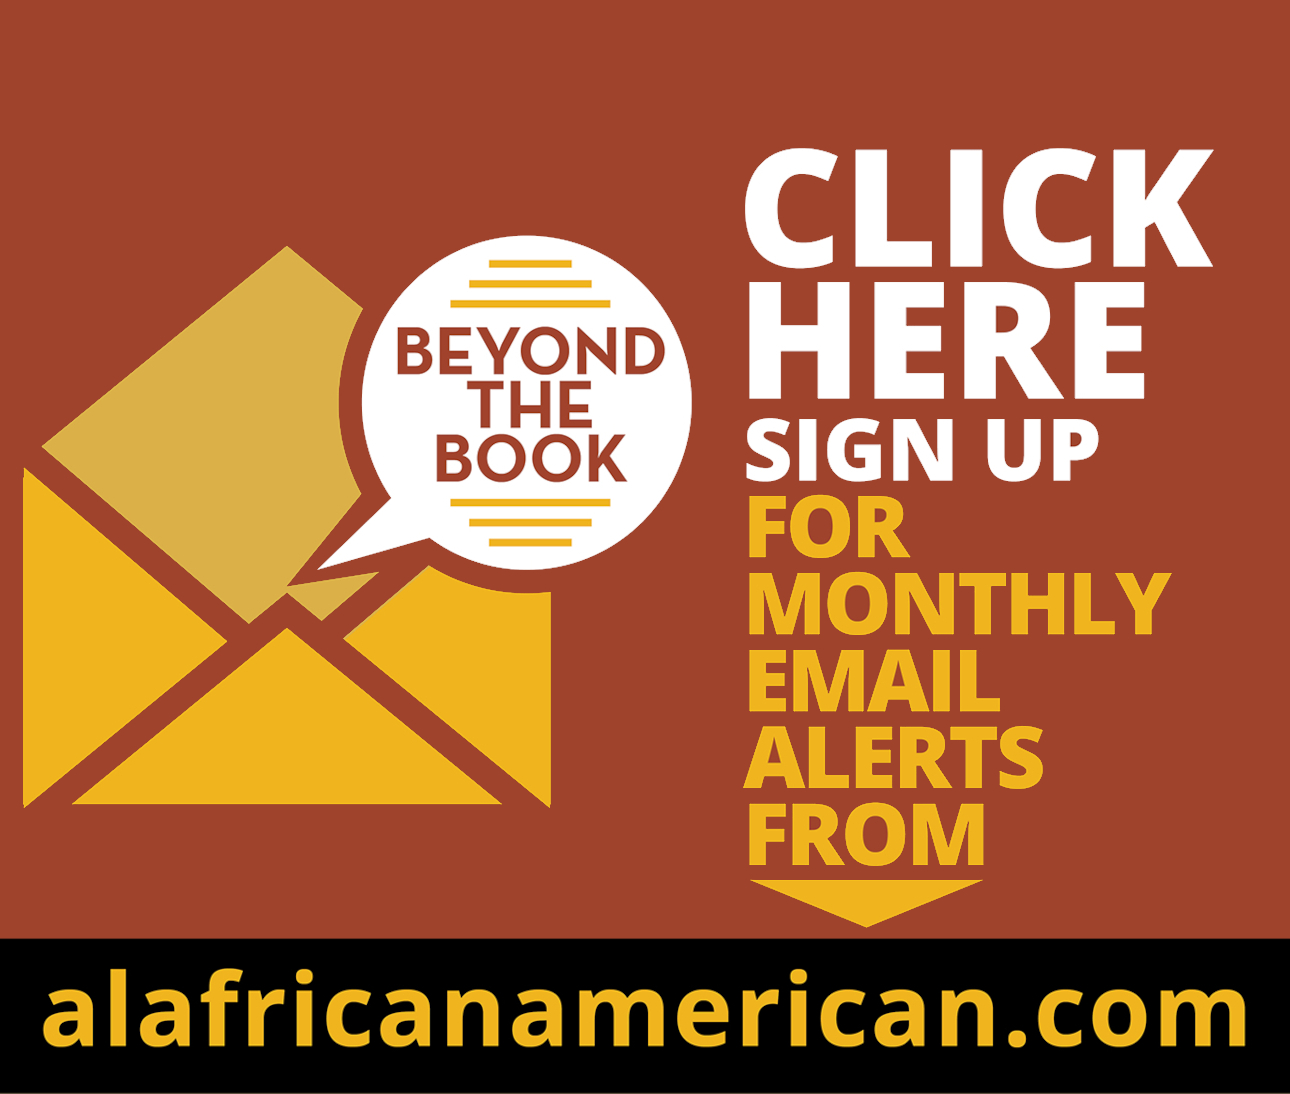 Sign up for Monthly email alerts